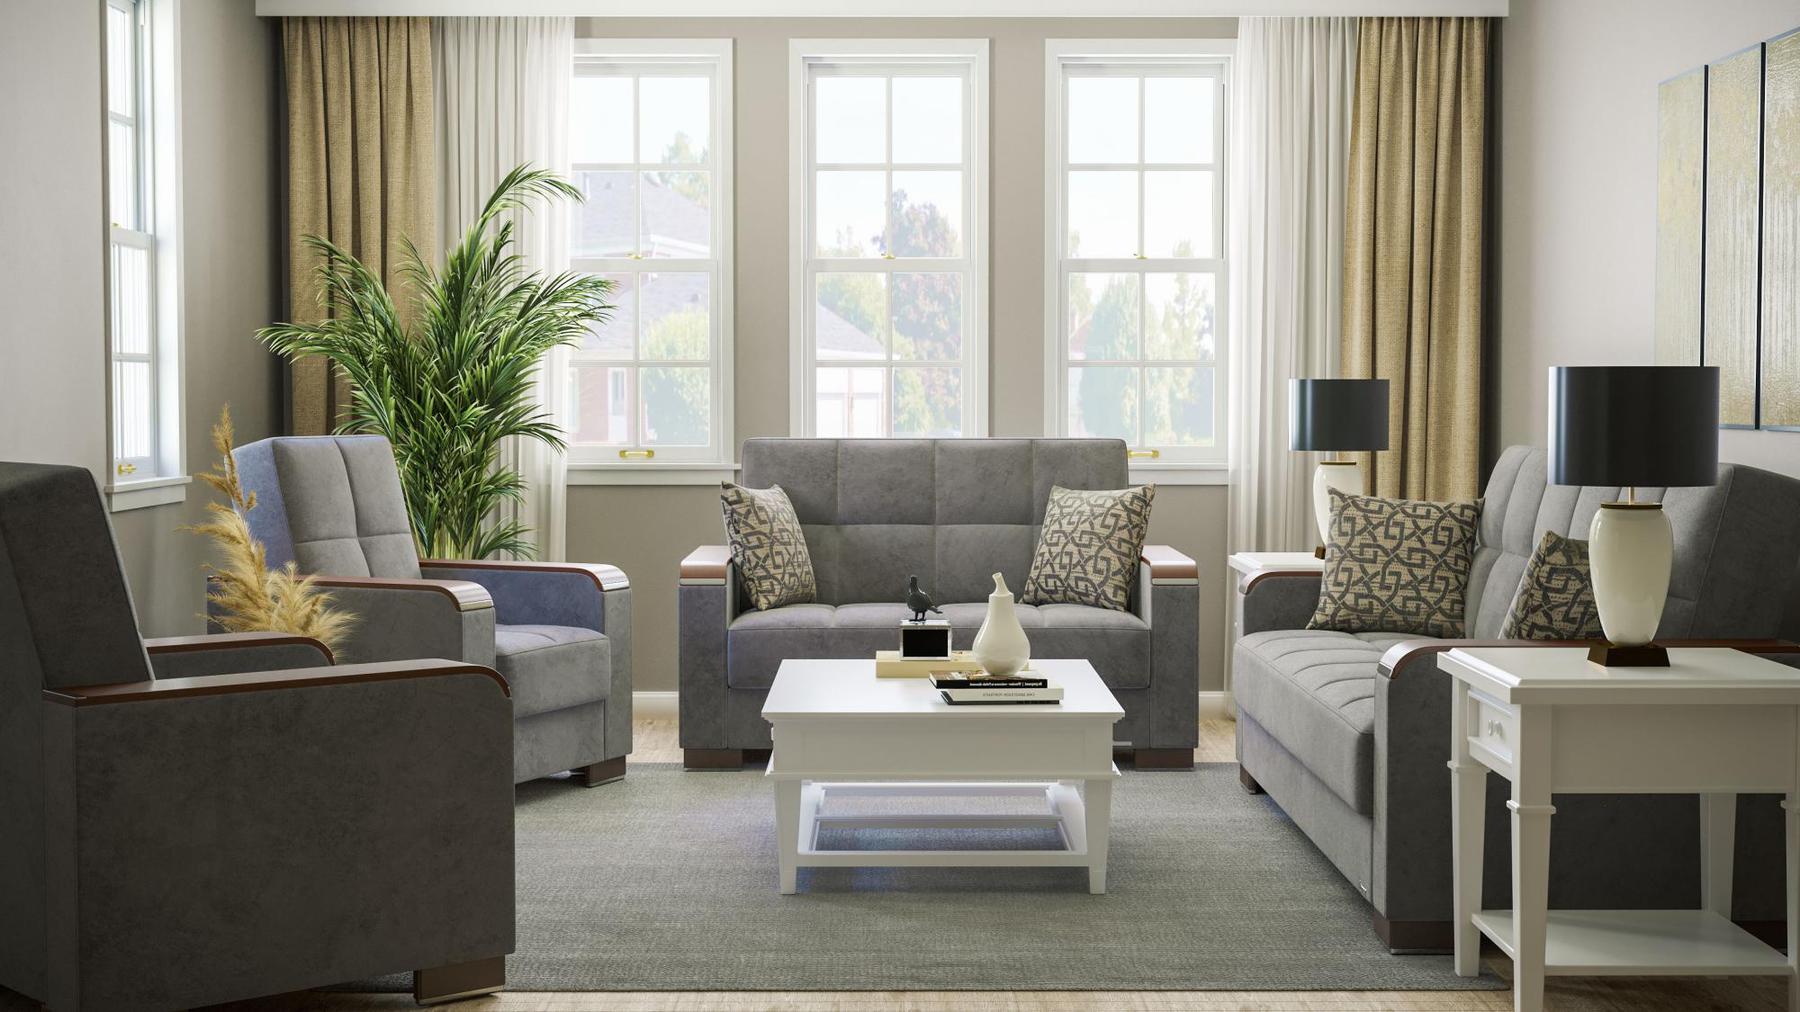 Modern design, Pewter Gray , Microfiber upholstered convertible sleeper Sofabed with underseat storage from Voyage Luxe by Ottomanson in living room lifestyle setting with the matching furniture set. This Sofabed measures 90 inches width by 36 inches depth by 41 inches height.